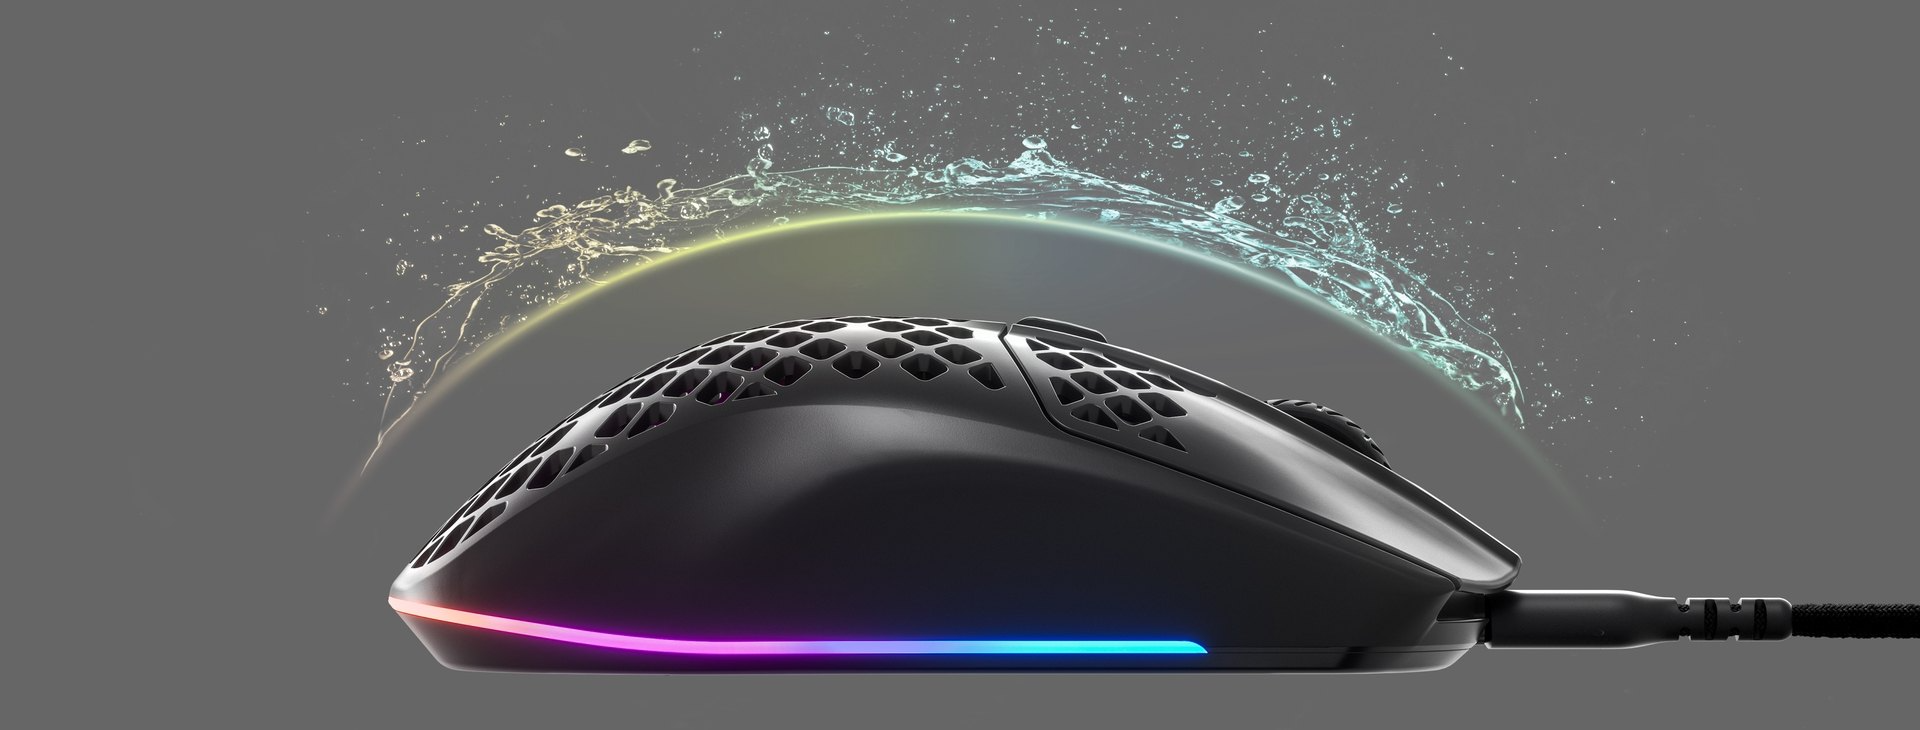 An Aerox 3 mouse with an invisible shield protecting it from incoming water splashing, to convey the waterproofing features